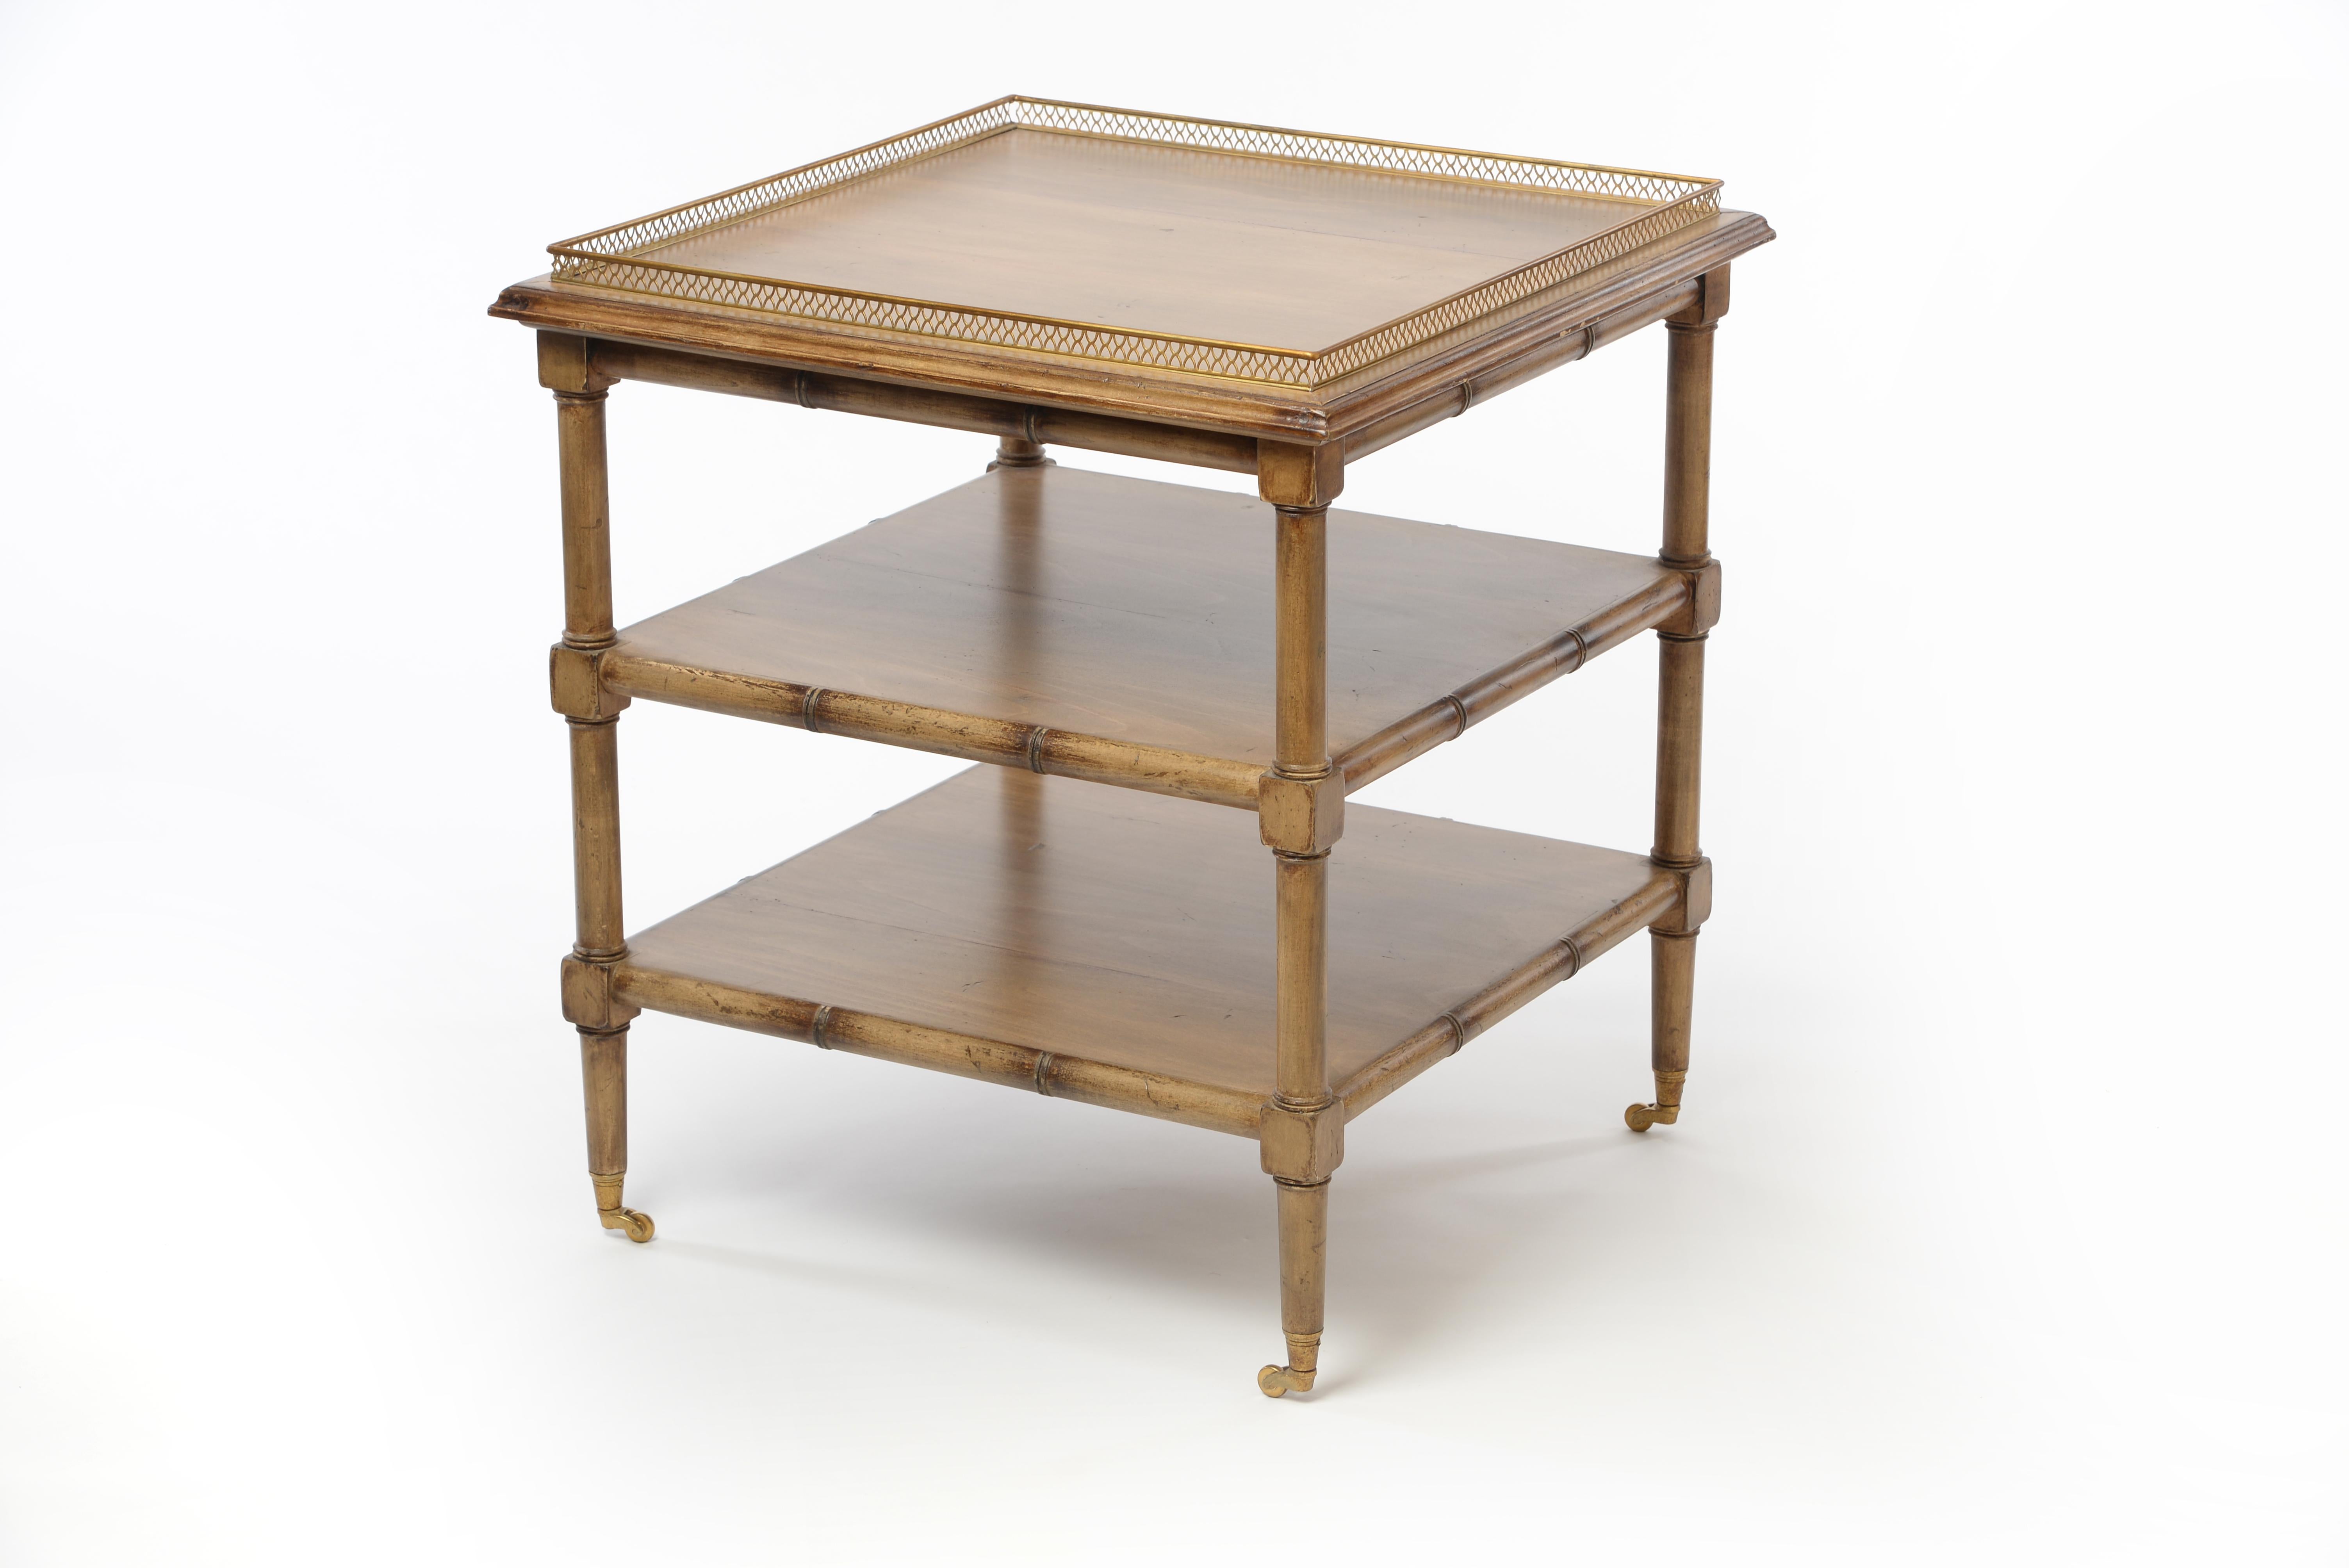 Very elegant bamboo side tables with three fixed tops offering great storage. Sophisticated brass details around the first top adding additional style. Wheels giving extra character and flexibility. Also nice to be used as nightstands. The table are